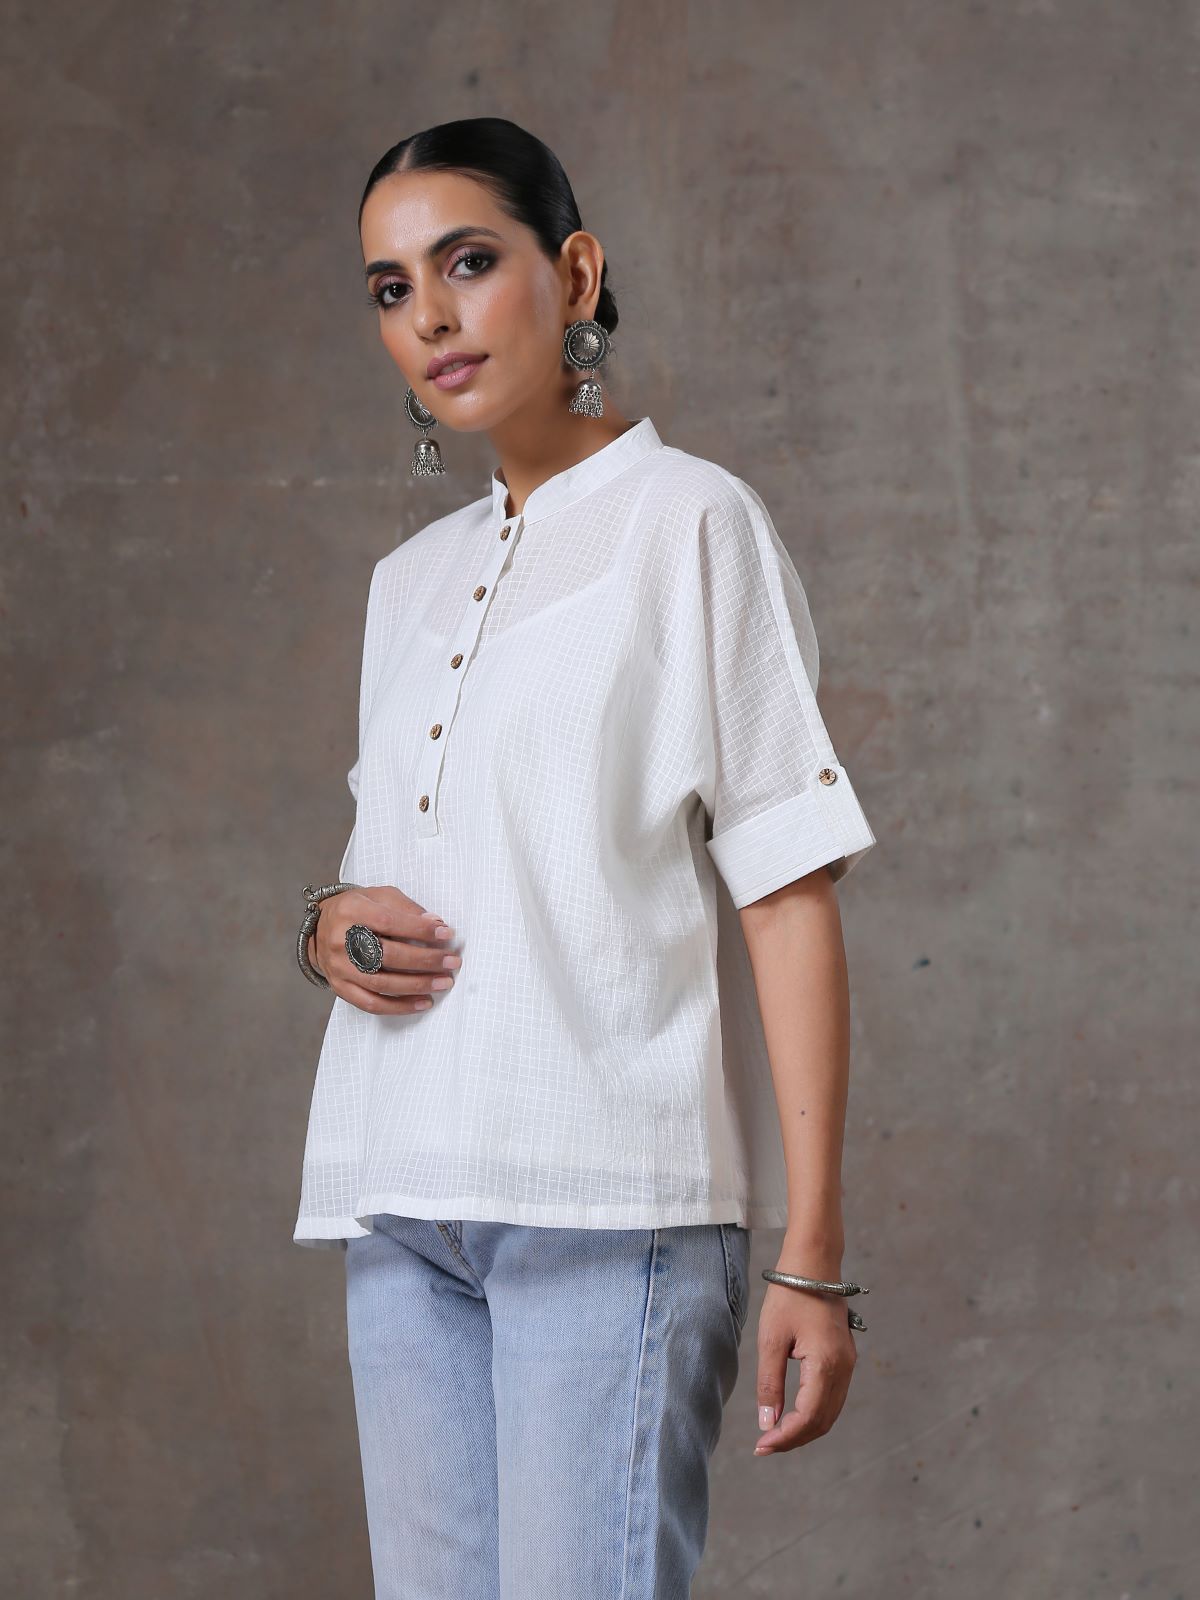 Glow- White textured boxy top with camisole- SAMPLE SALE